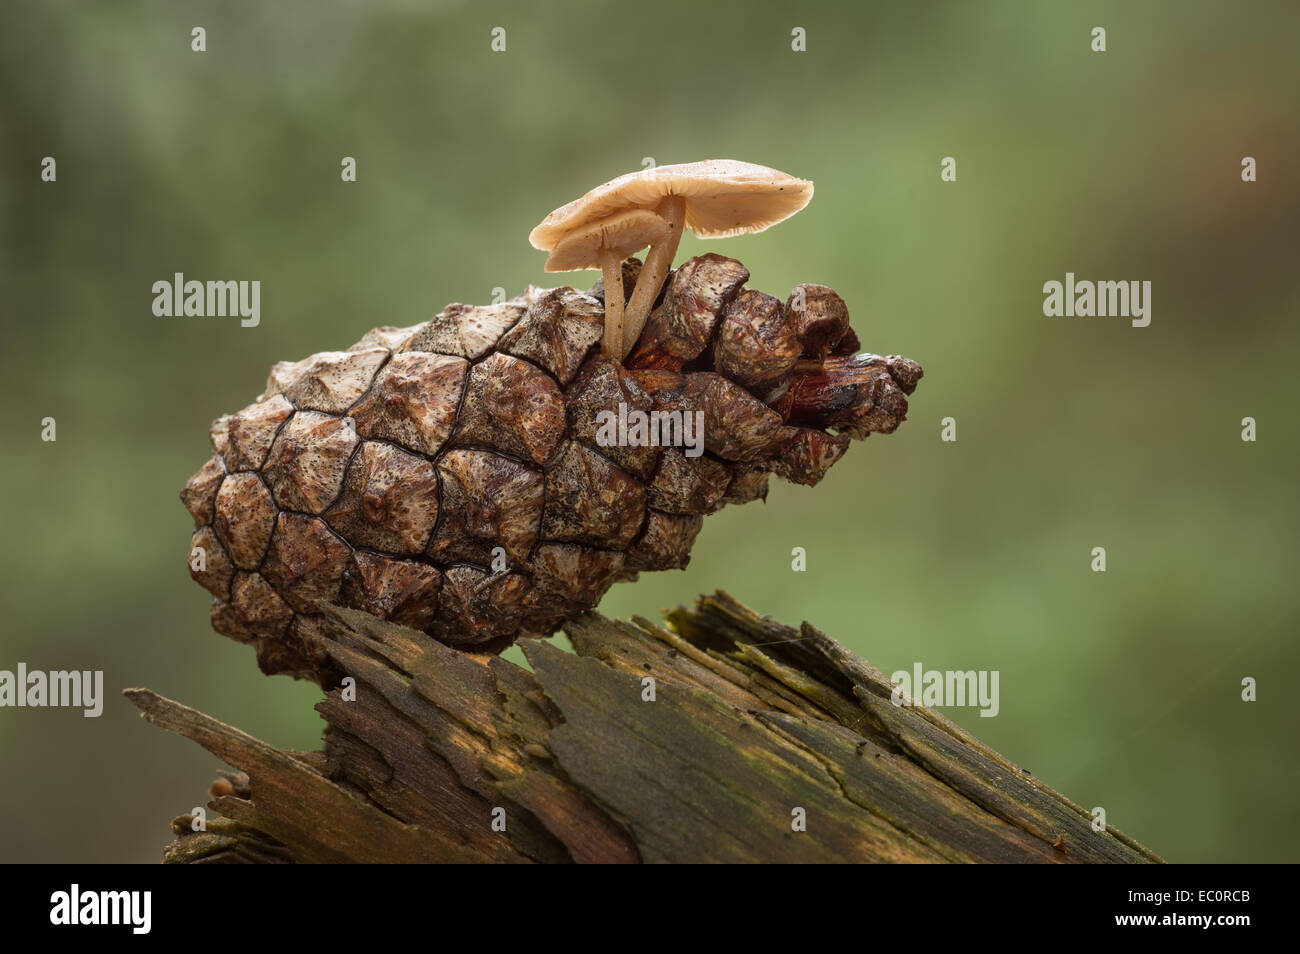 Conifer Cap / Pine Cap mushrooms growing from a Scots Pine cone Stock Photo